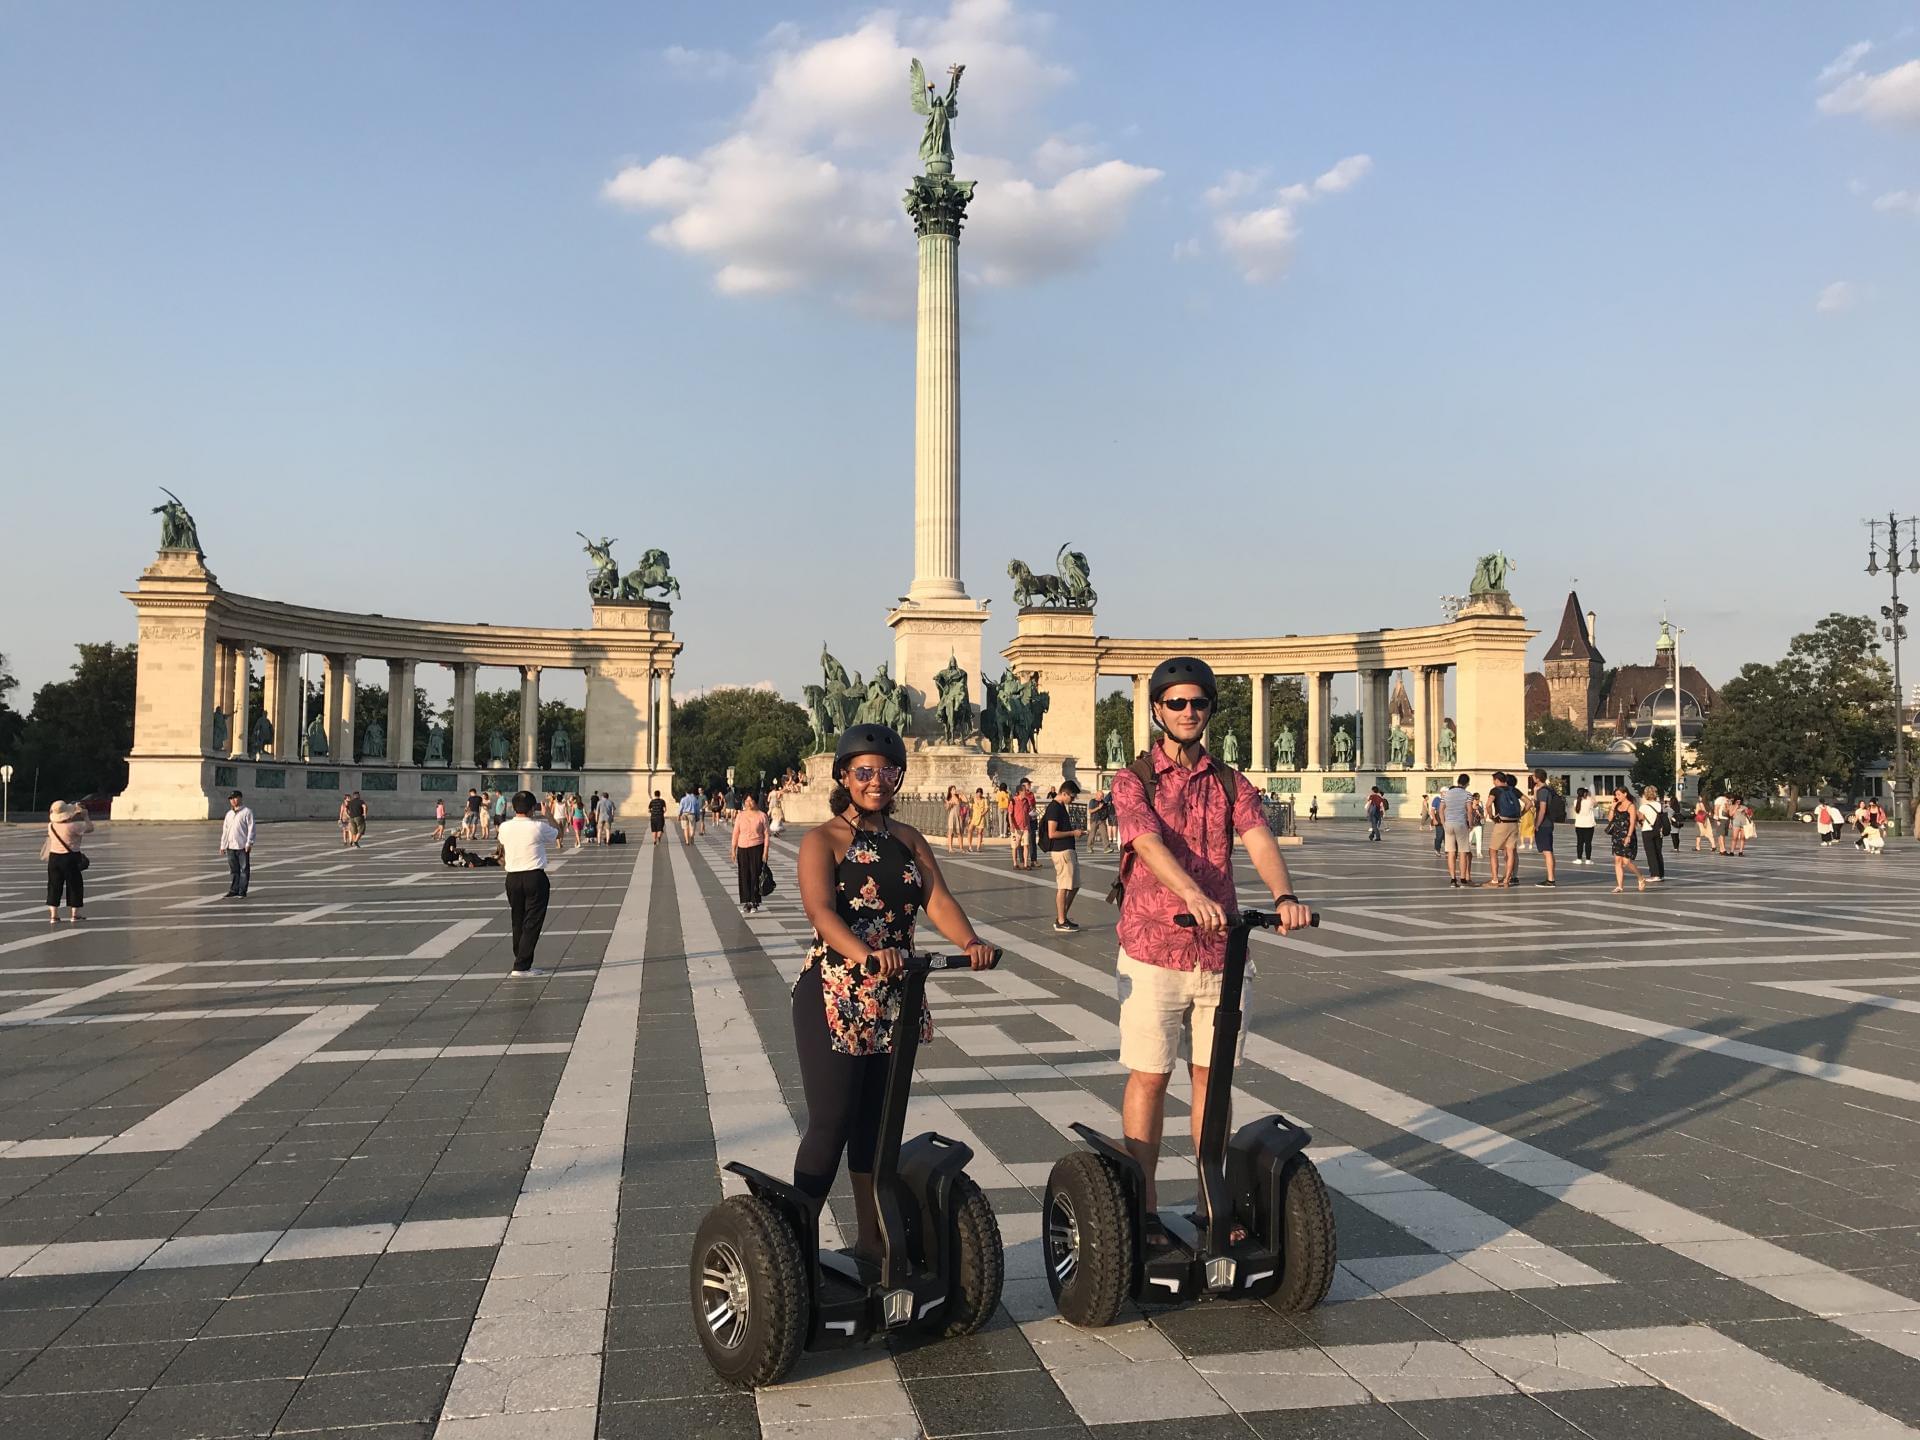 Segway tour on the Heroes Square